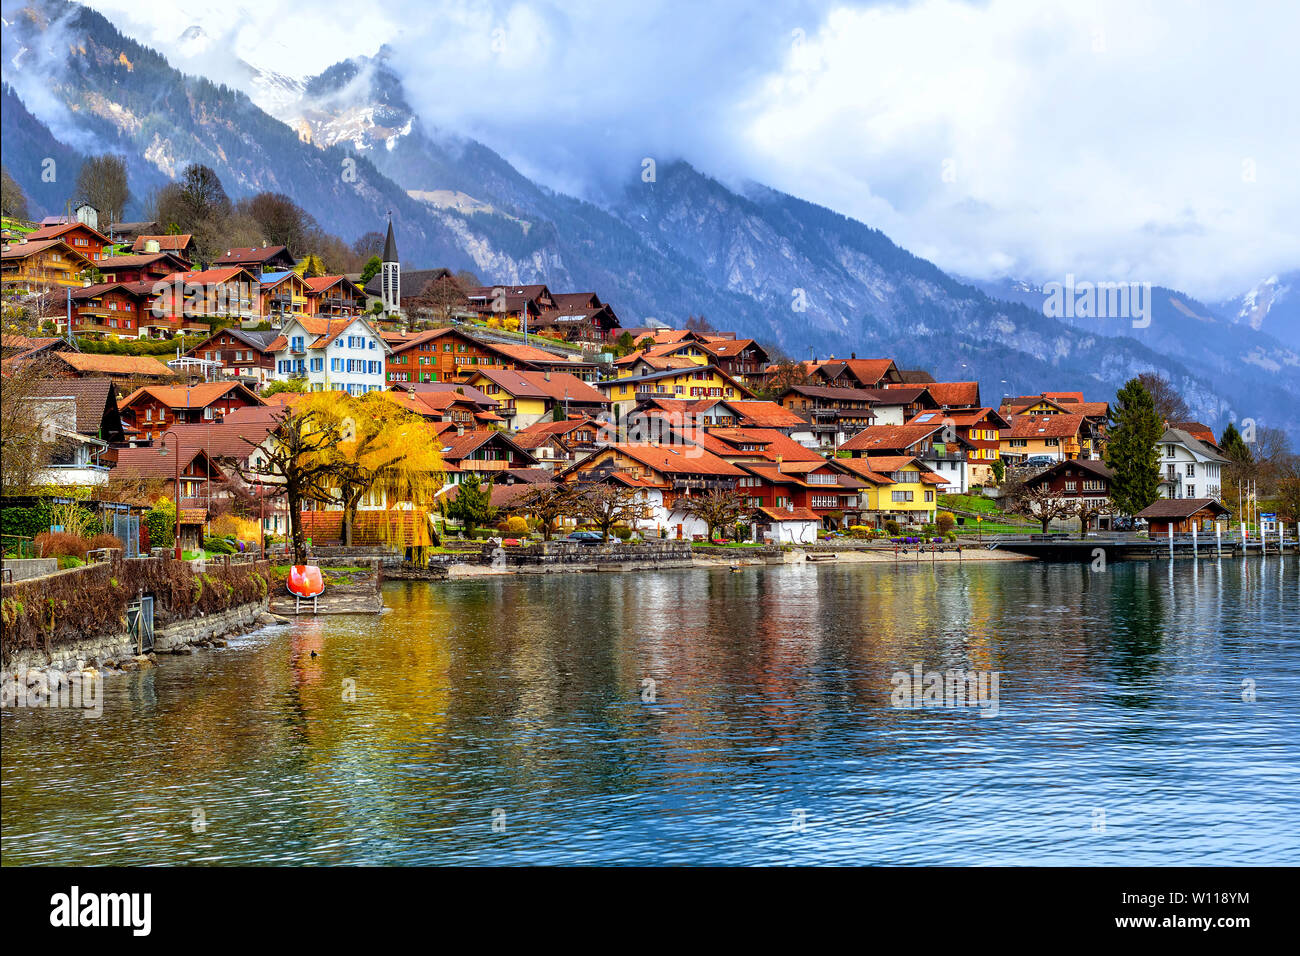 Old town of Oberried, Brienz, Interlaken and misty Alps mountains reflecting in lake, Switzerland Stock Photo